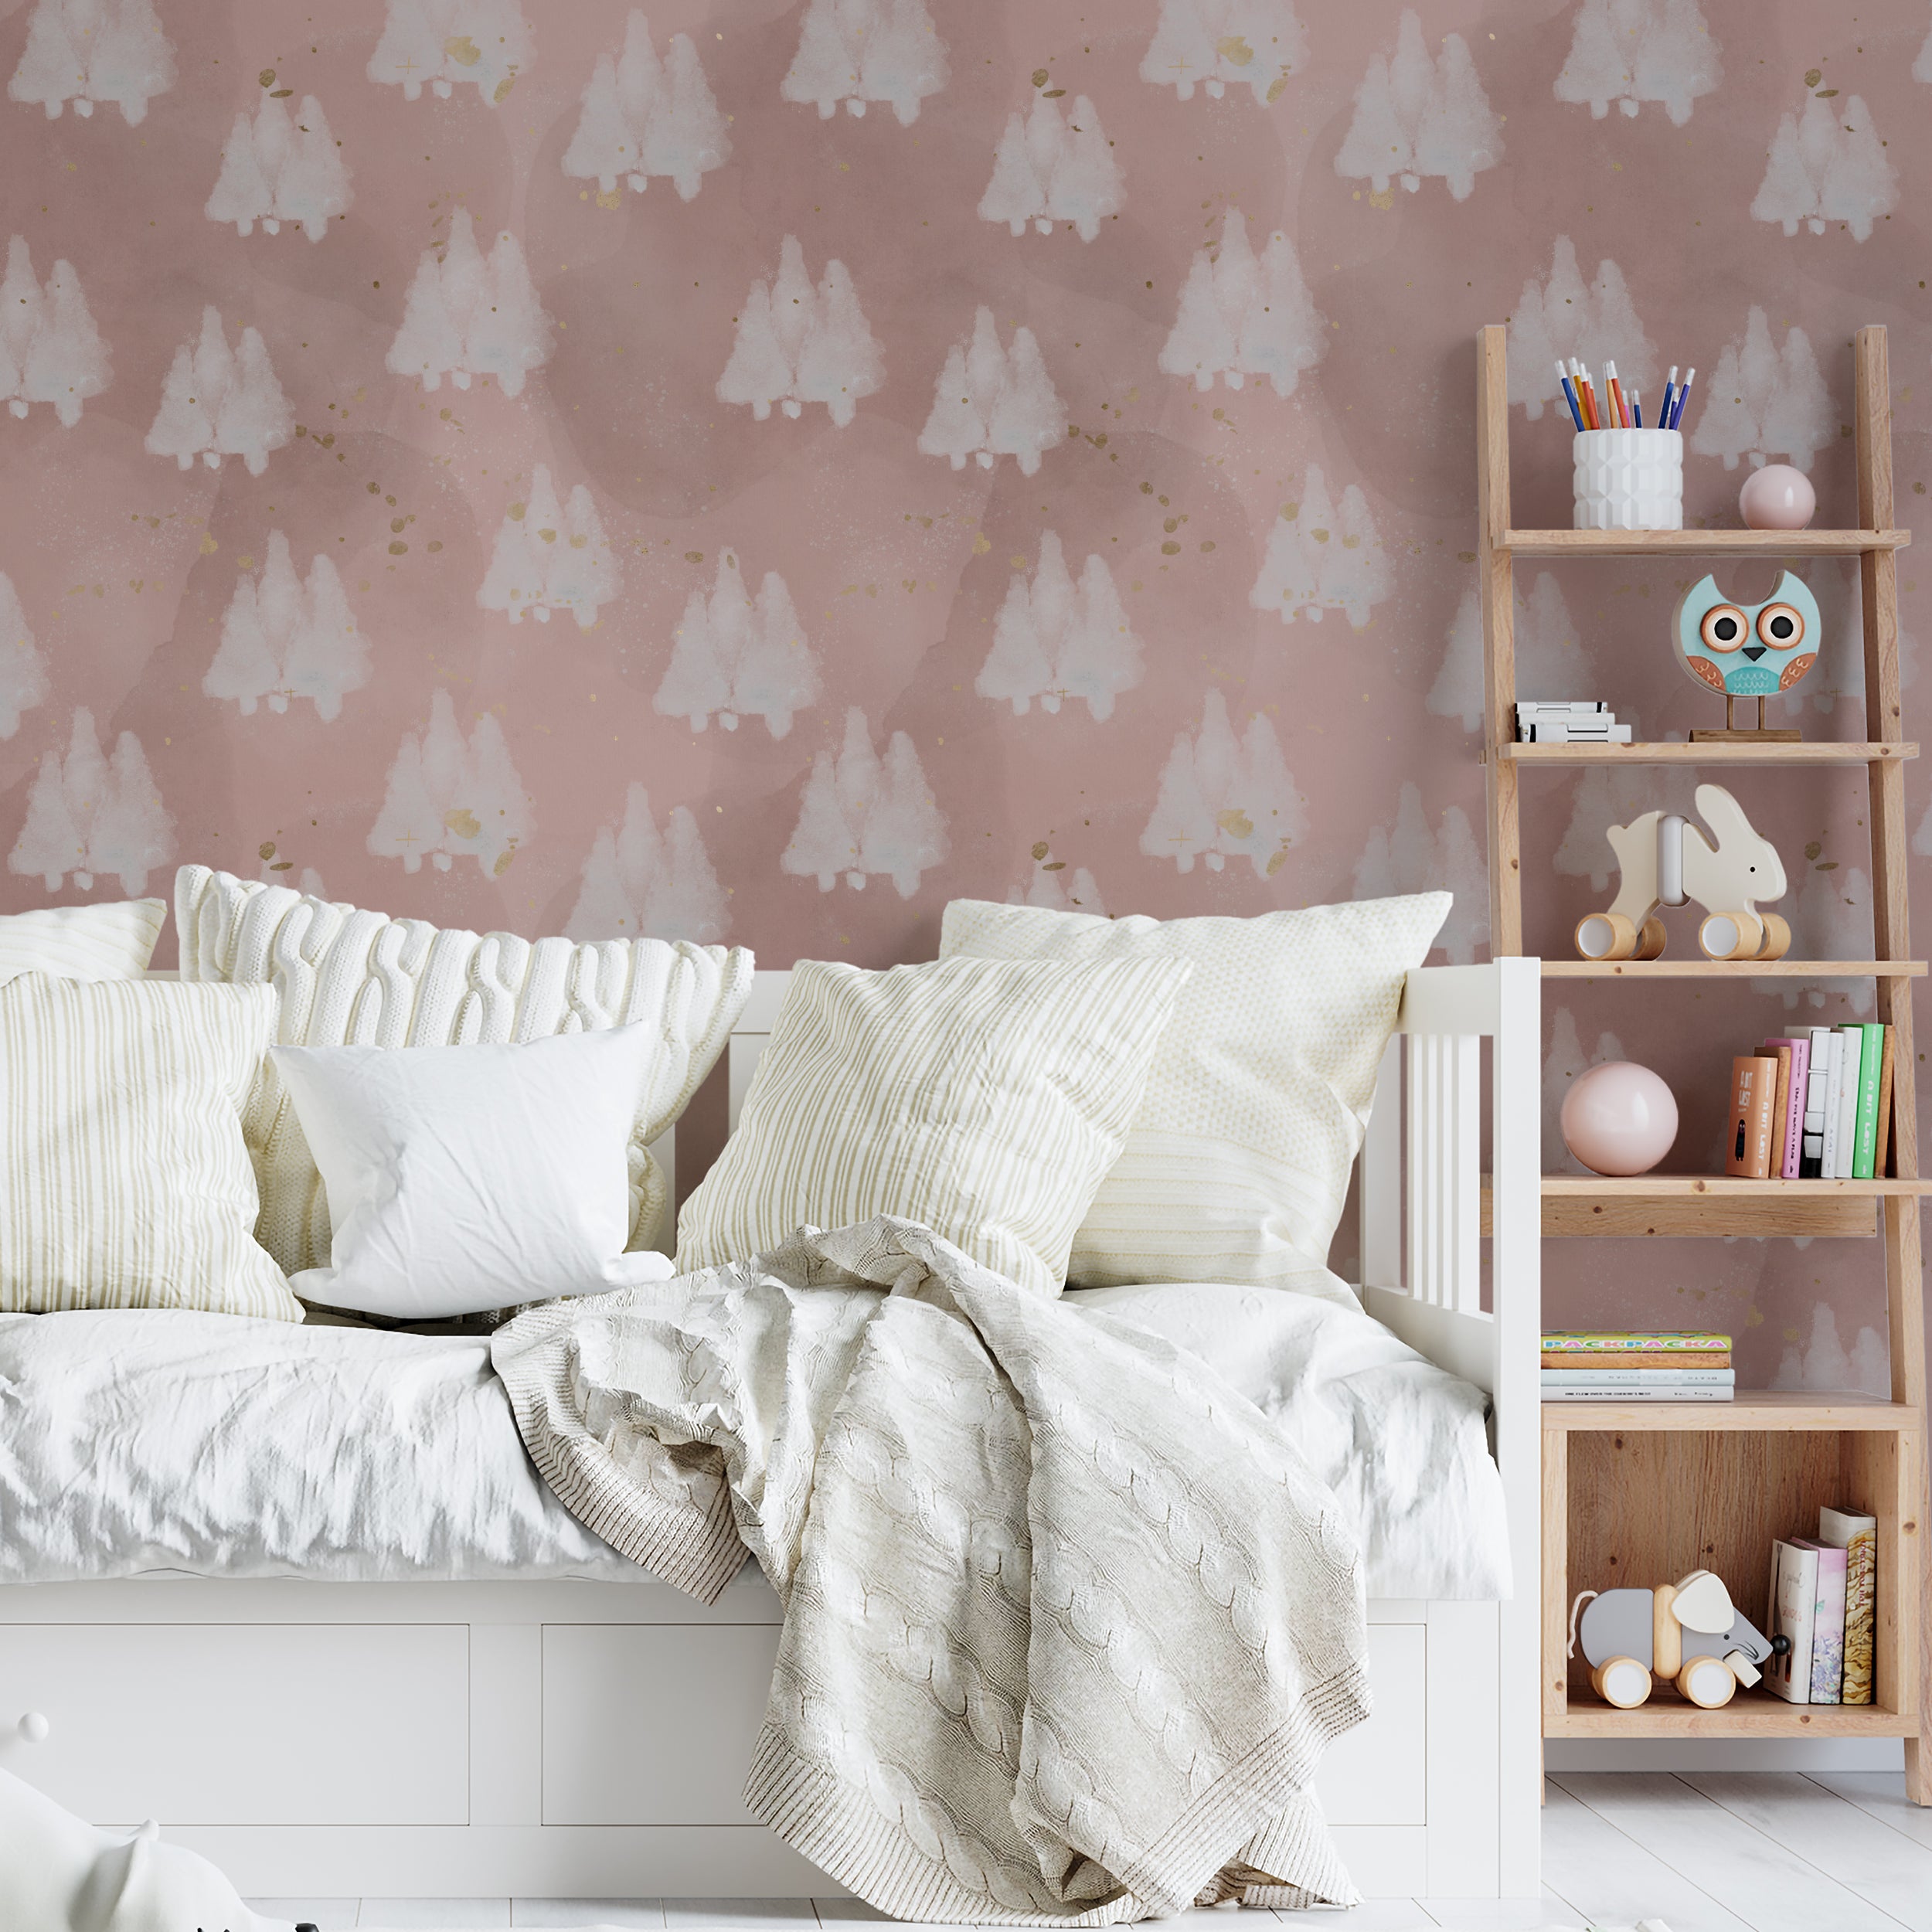 A child's bedroom displaying the Shimmer Tree Wallpaper - Pink on the walls, which portrays whimsical white trees with a snowy texture against a pastel pink backdrop, complemented by gold specks. The room is styled with cozy bedding and a playful assortment of toys and books, enhancing the room's gentle and magical atmosphere